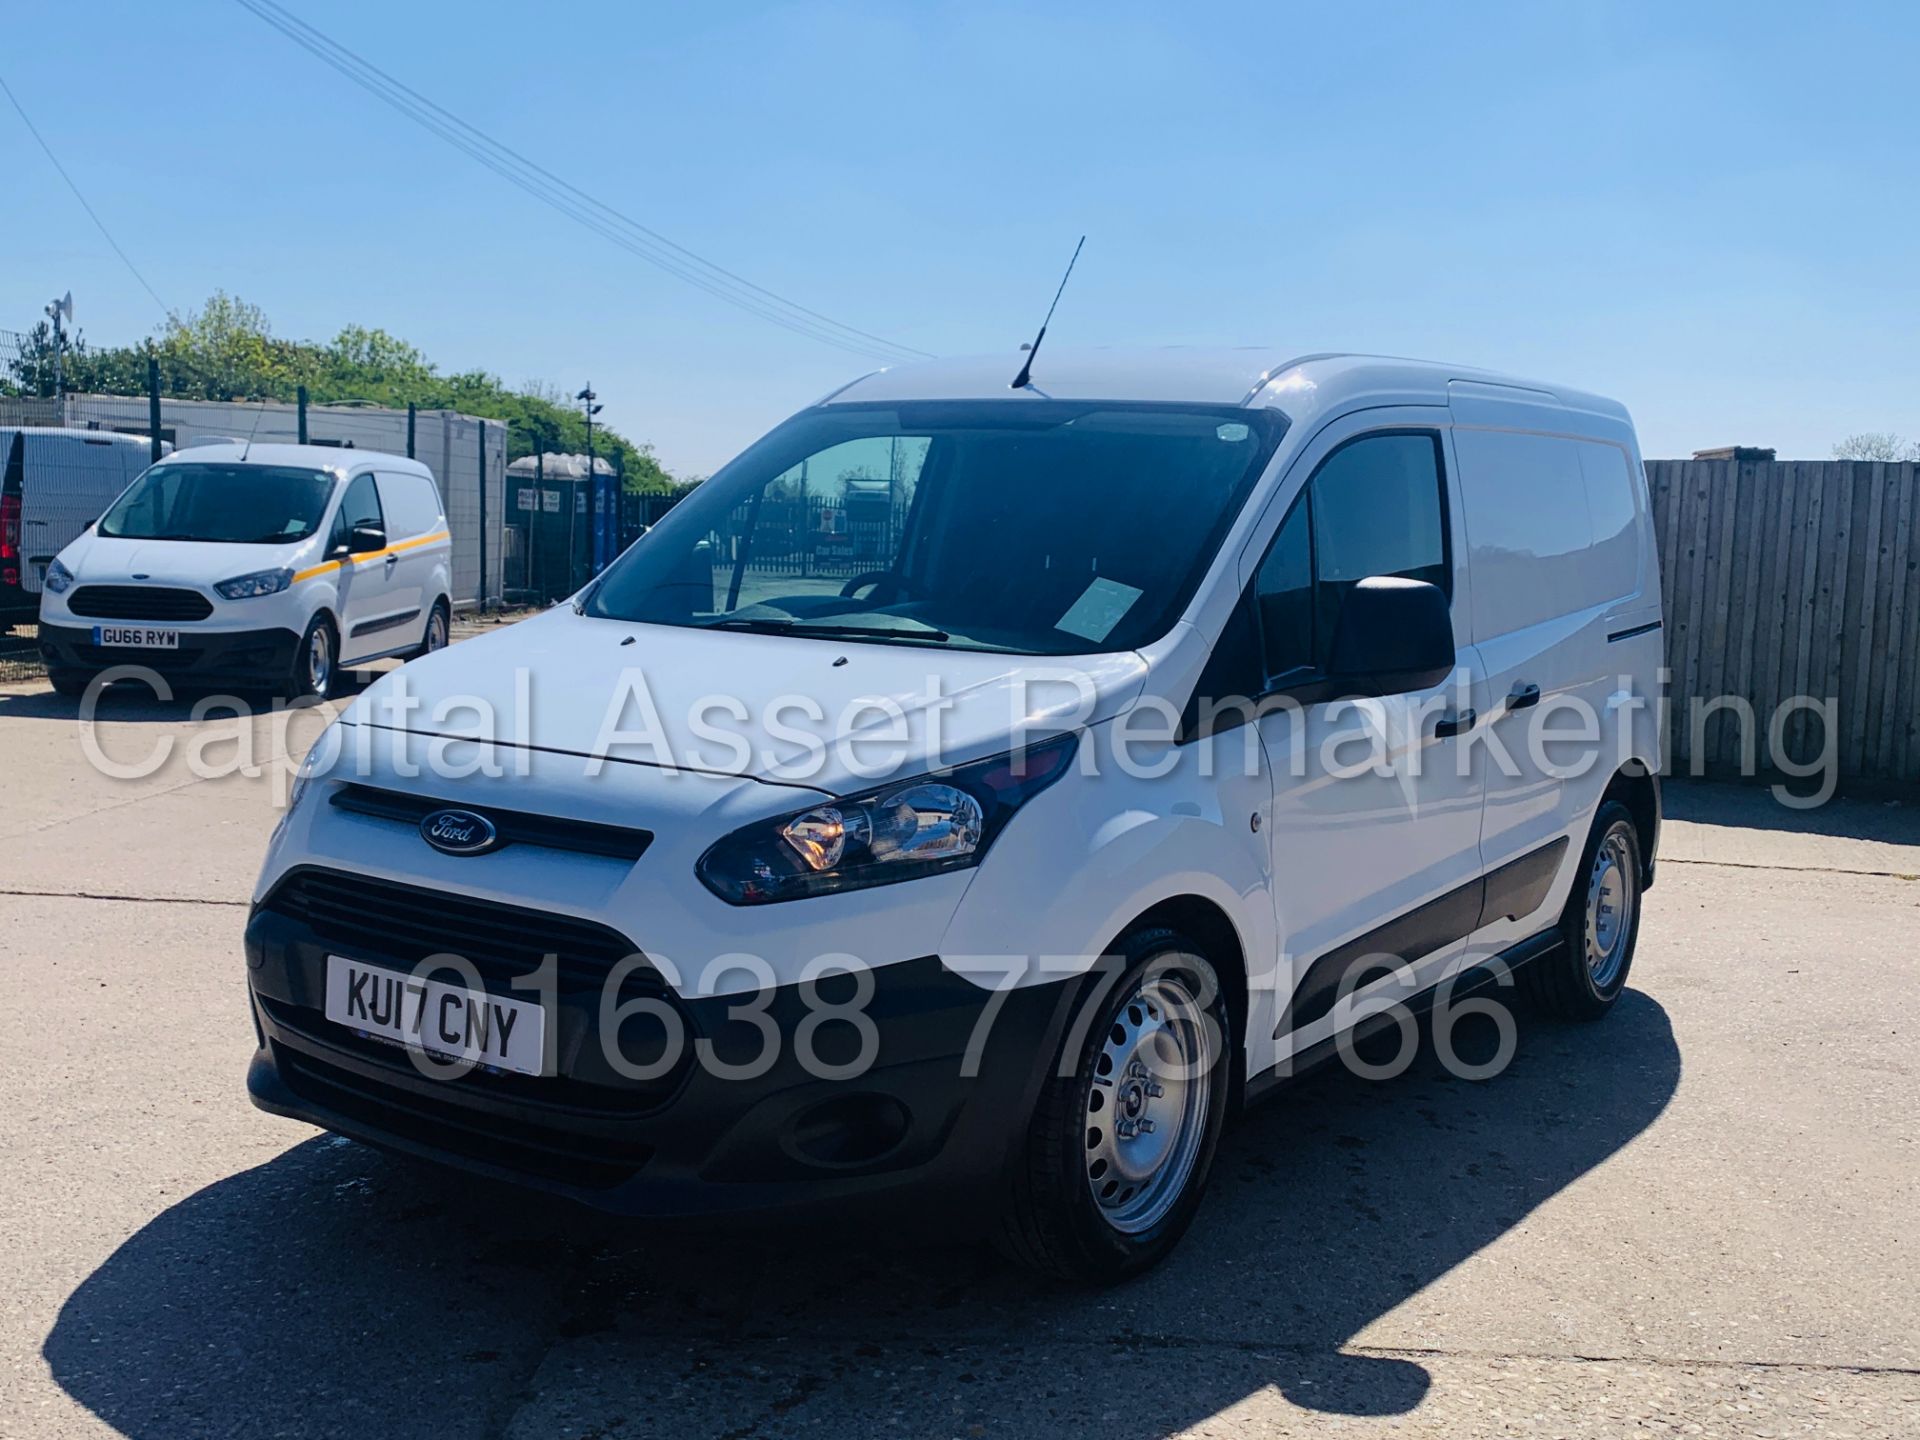 (On Sale) FORD TRANSIT CONNECT *SWB* (2017 - EURO 6) '1.5 TDCI - 6 SPEED' (1 OWNER - FULL HISTORY) - Image 2 of 38